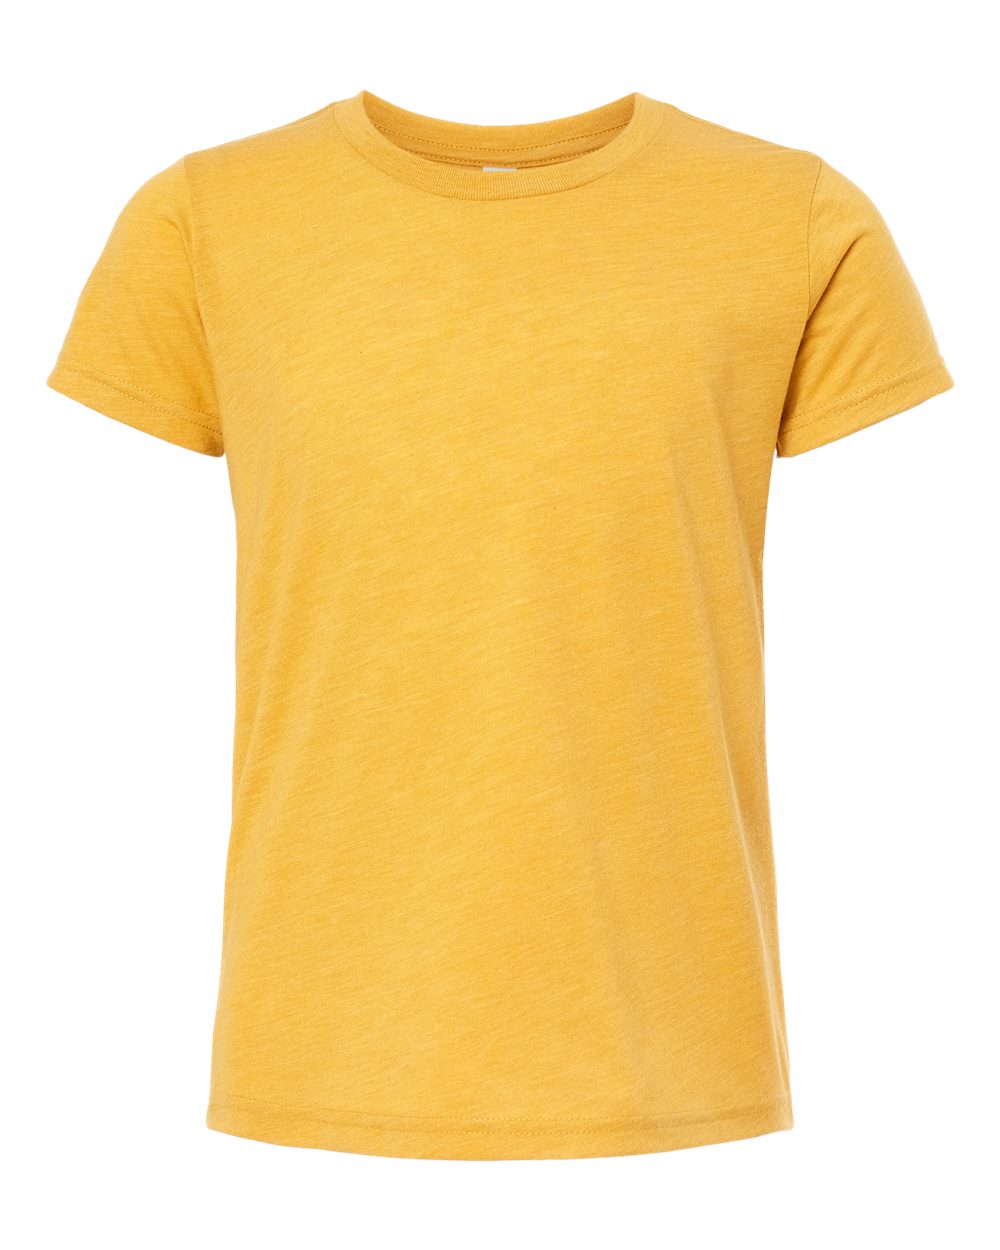 Bella + Canvas Youth Triblend Tee (3413y) in Mustard Triblend